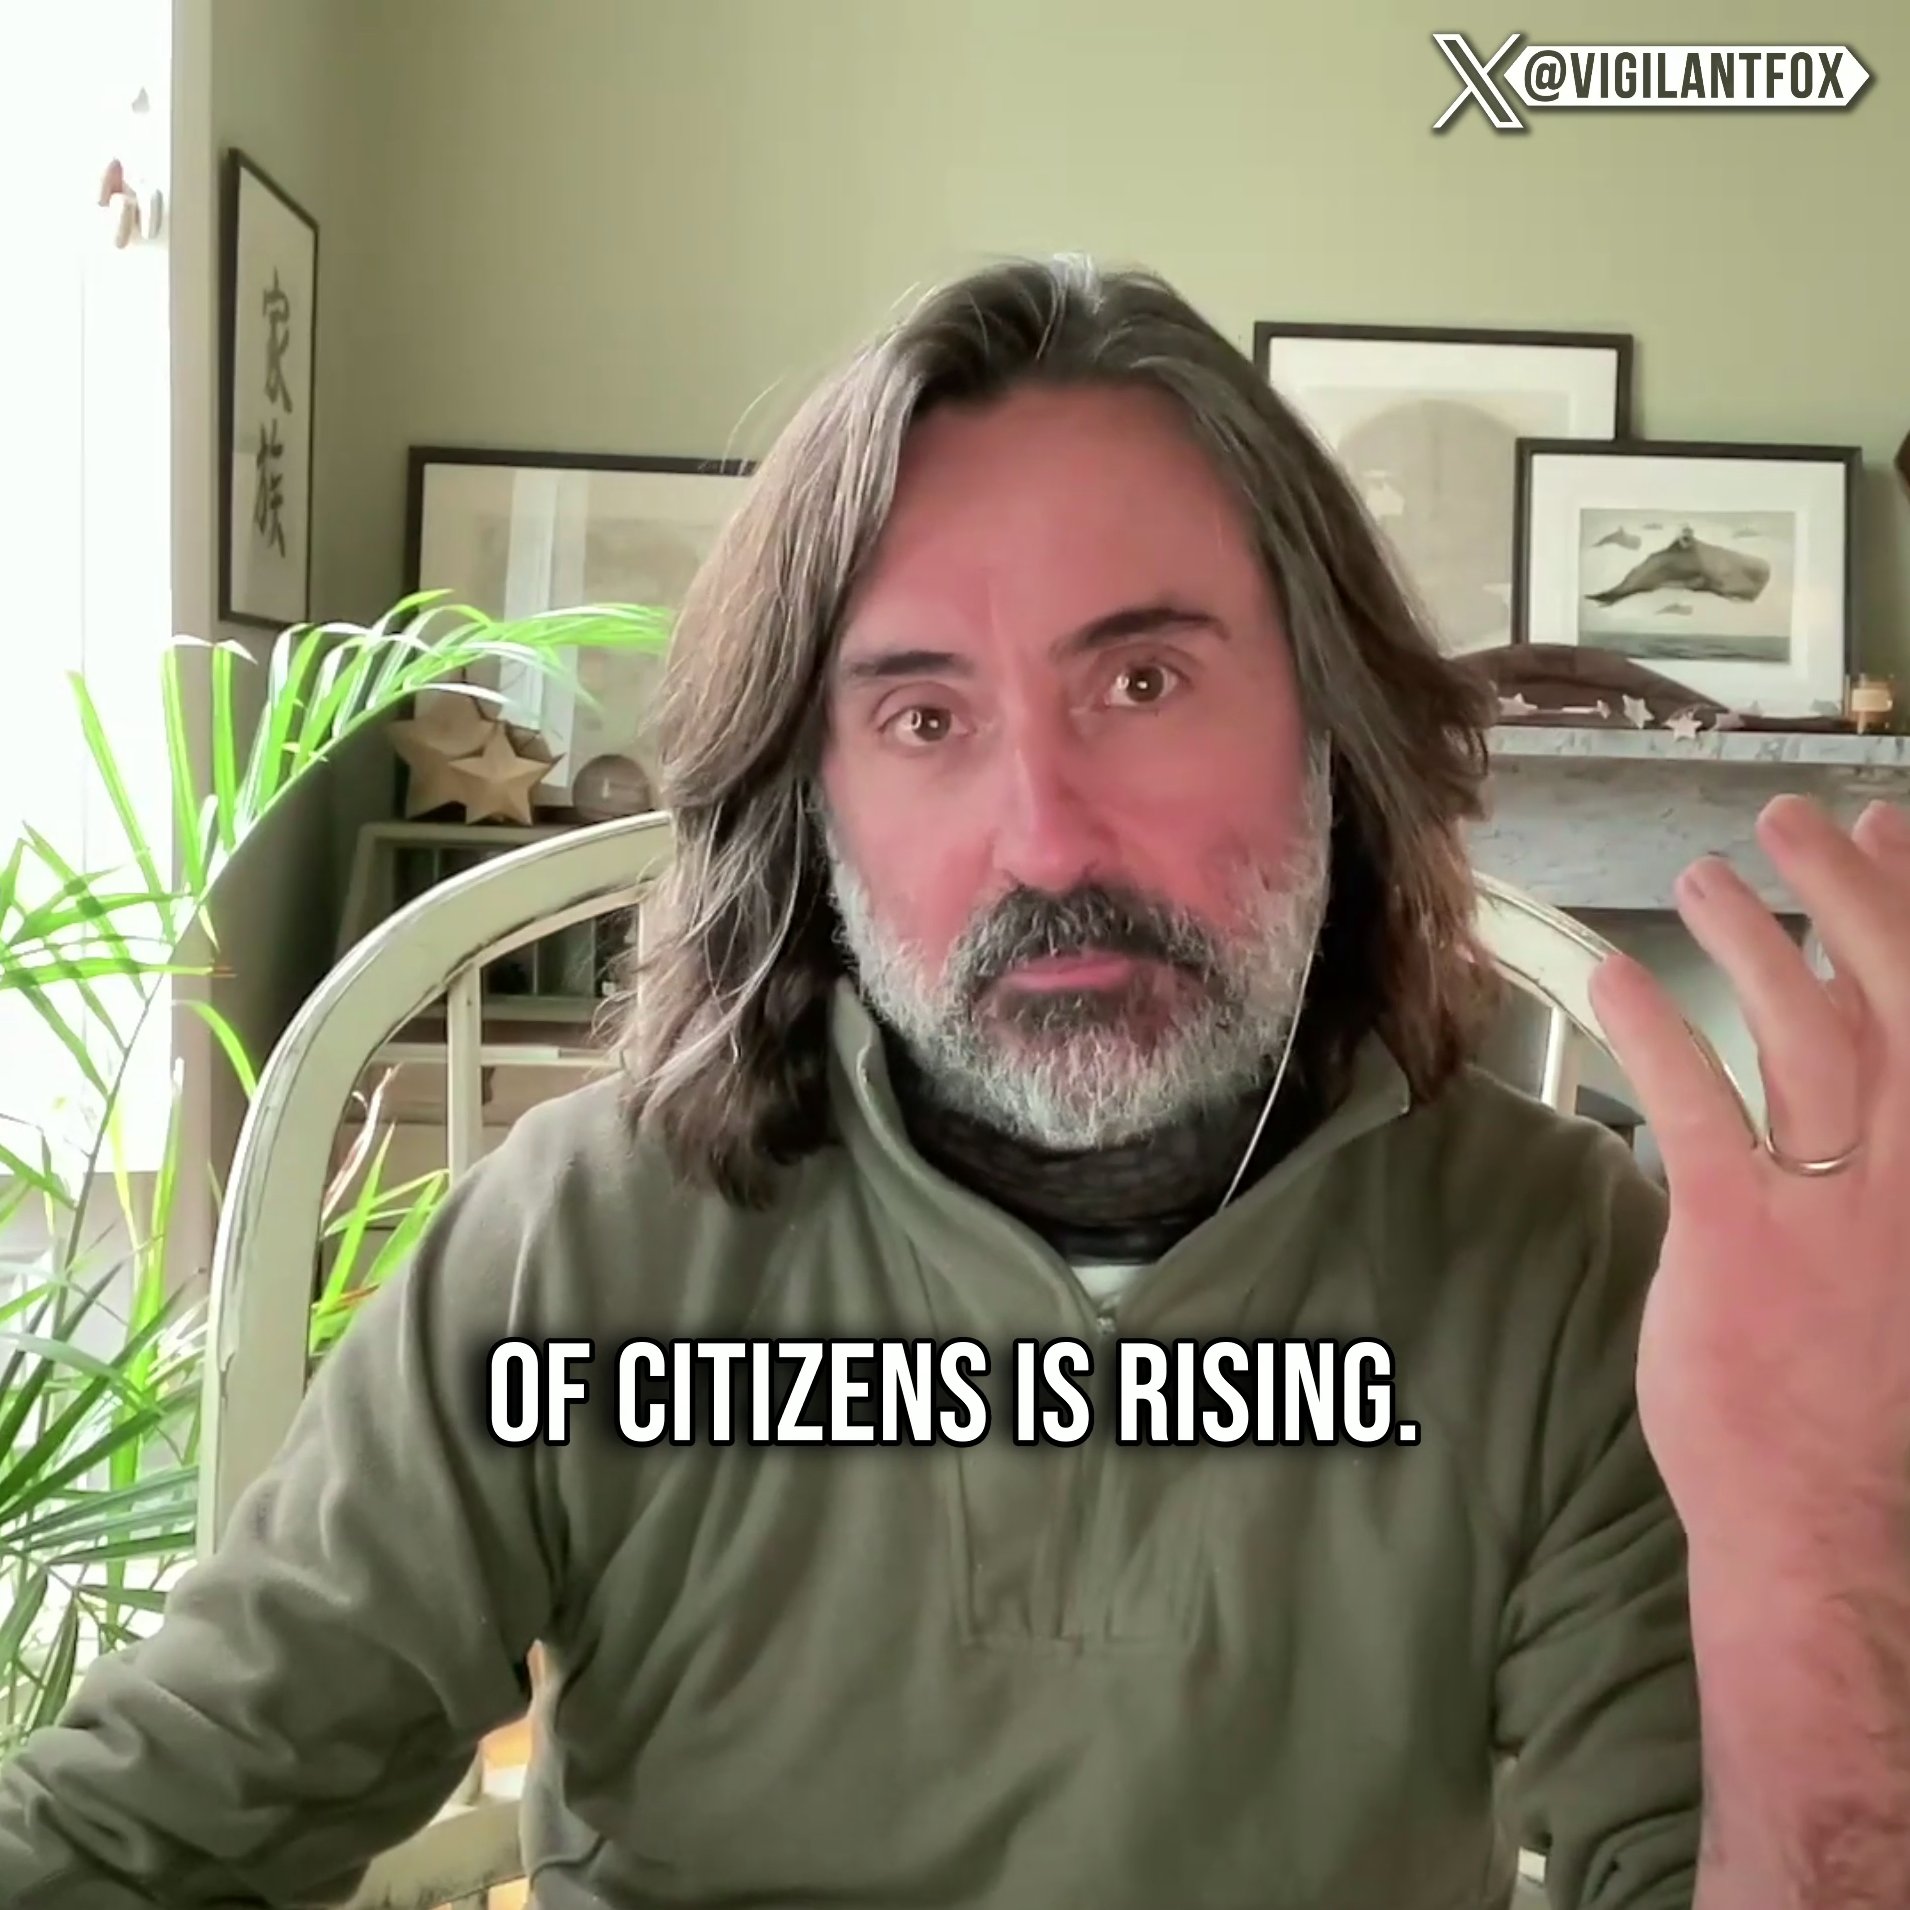 Neil Oliver Warns ‘A Storm Is Coming’ for The Guilty